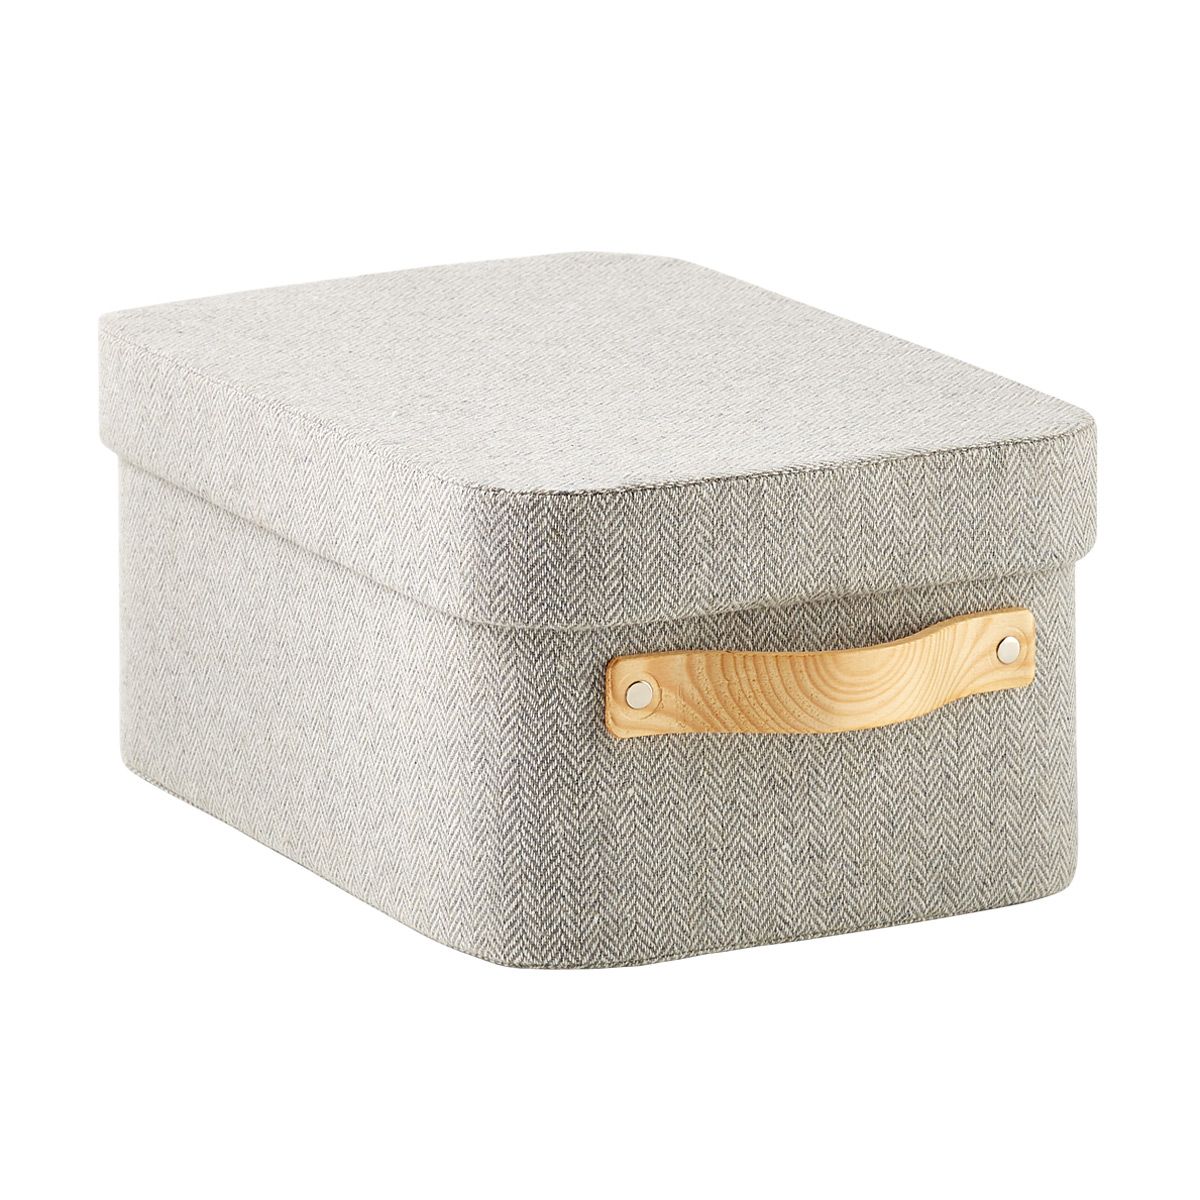 Herringbone Storage Boxes with Wooden Handles | The Container Store